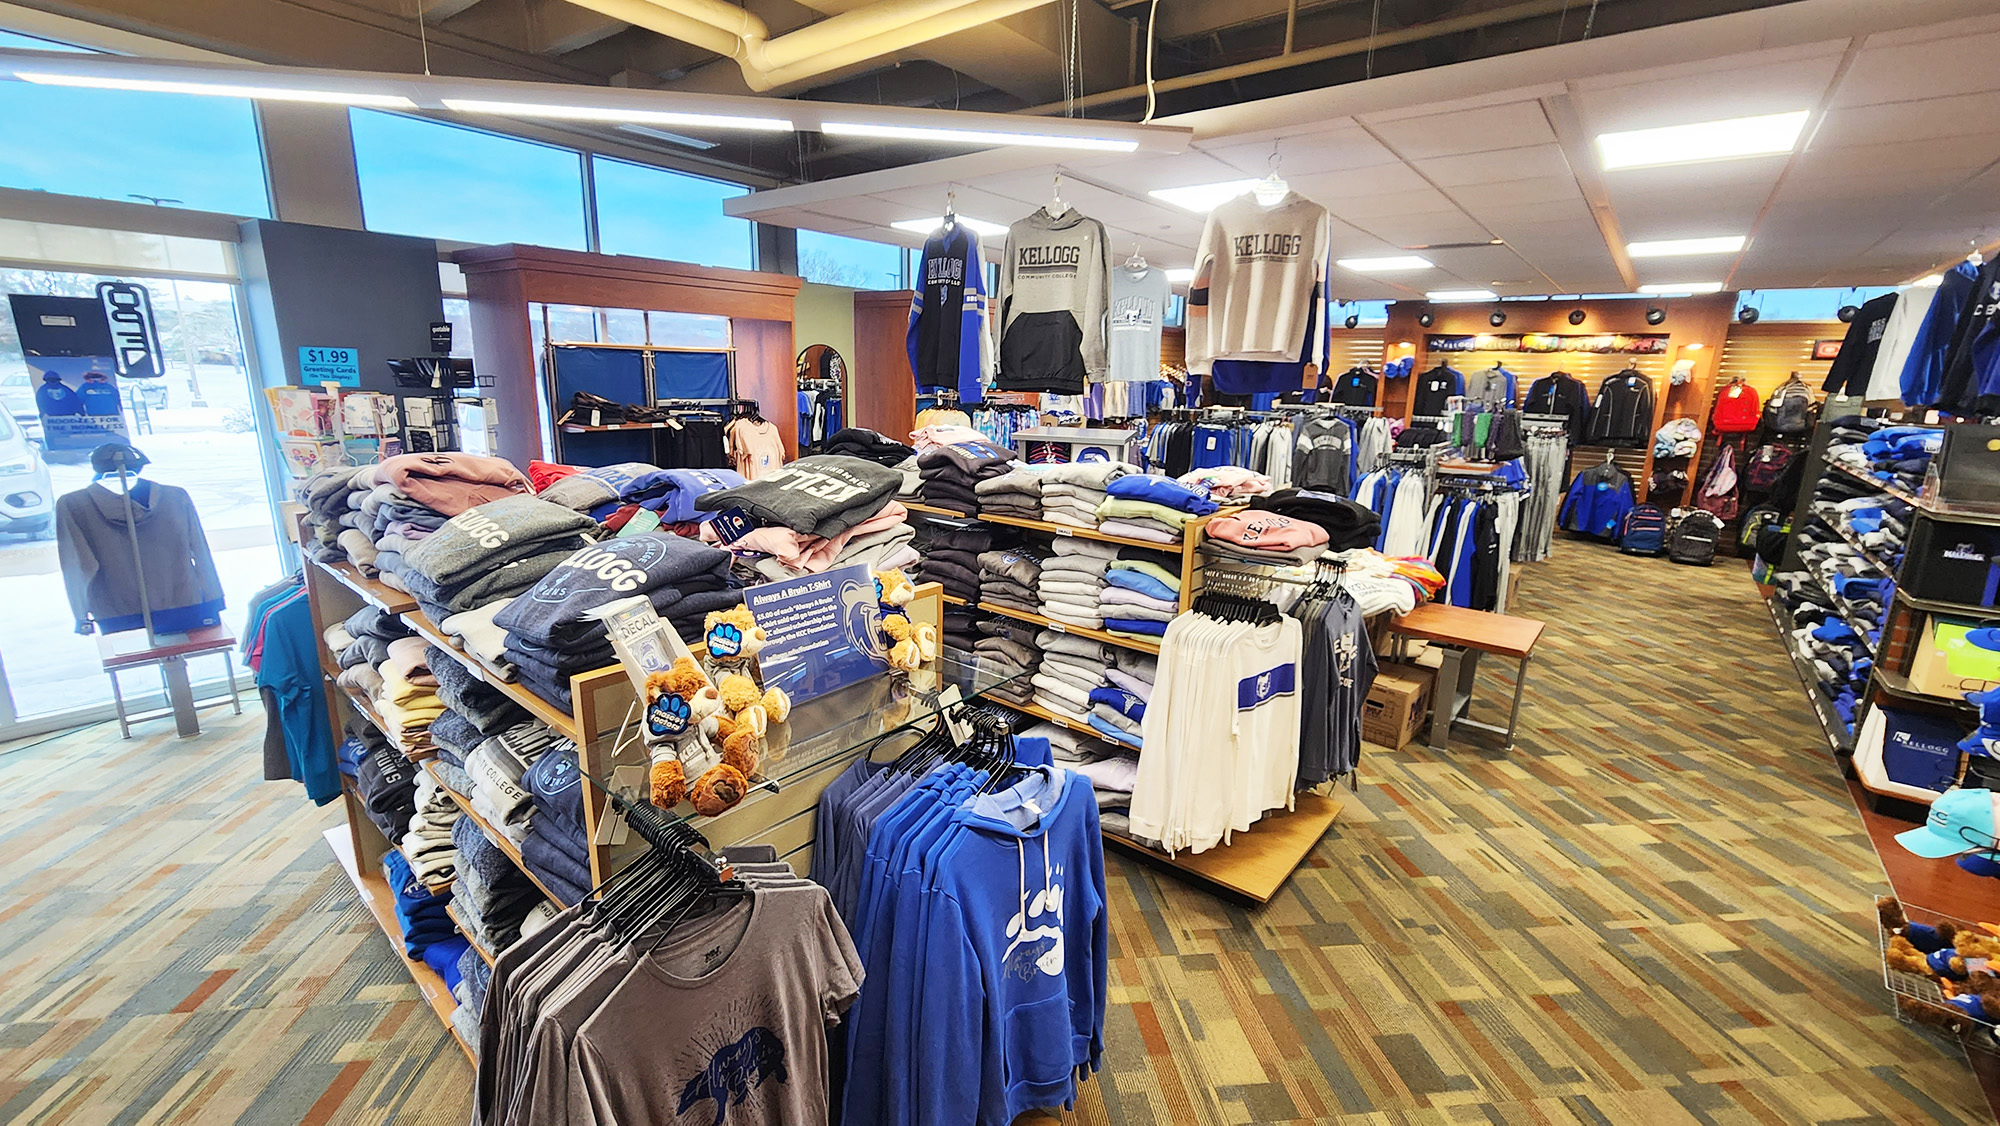 An interior view of the Bruin Bookstore showing various clothing items on sale.